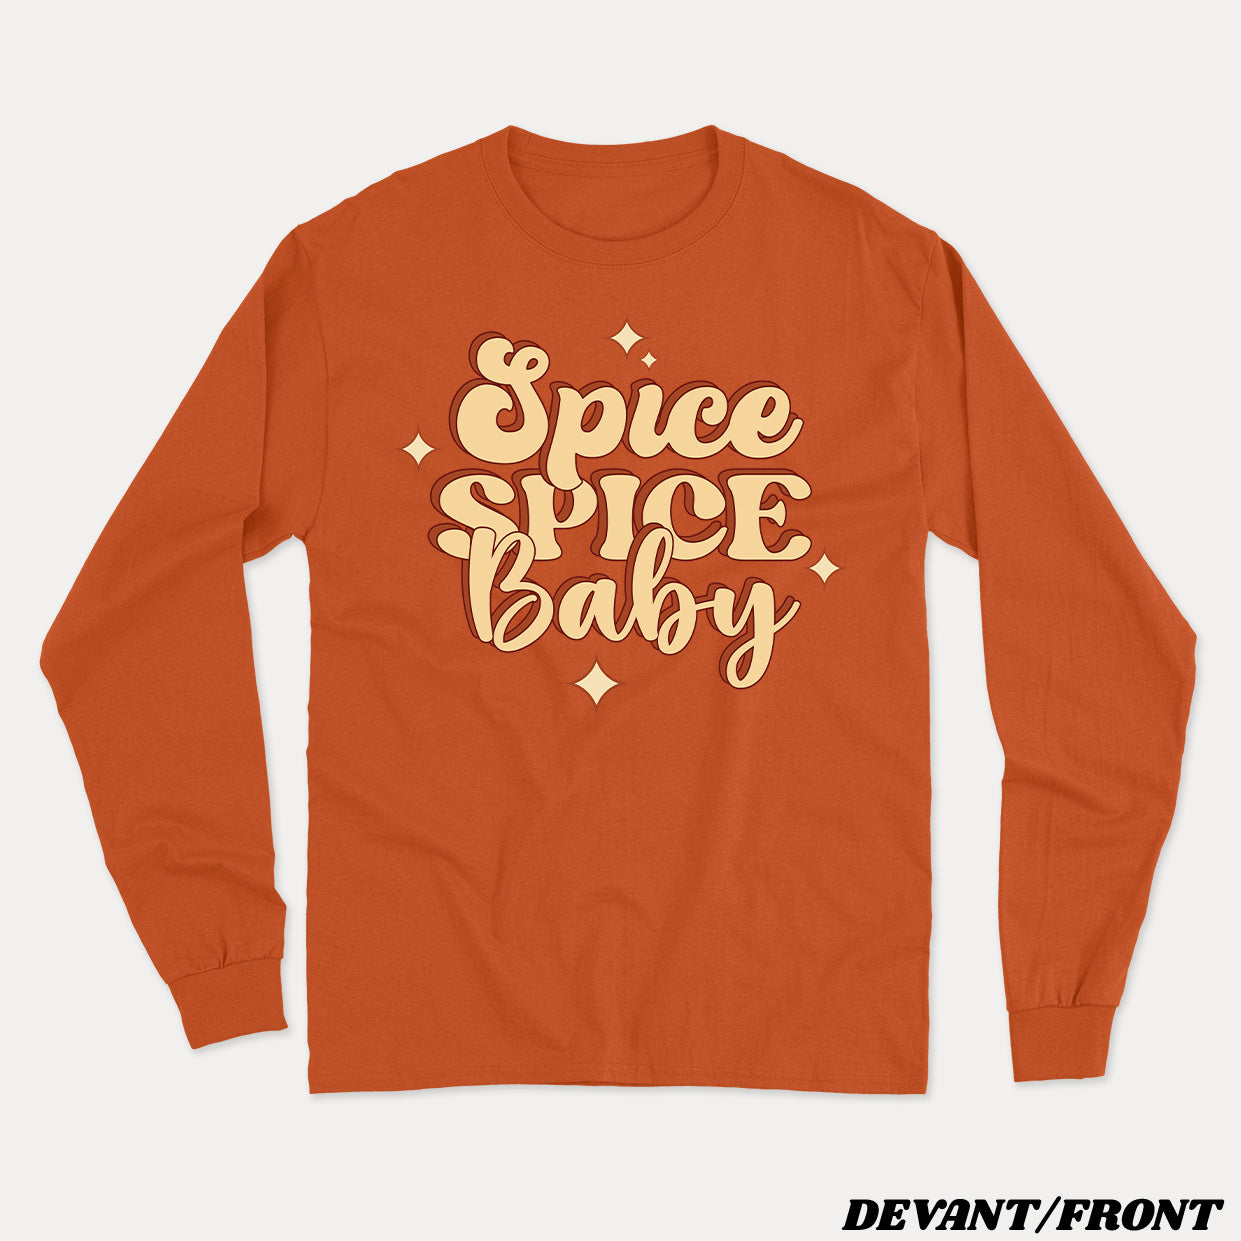 SPICE SPICE BABY longsleeve unisexe - tamelo boutique